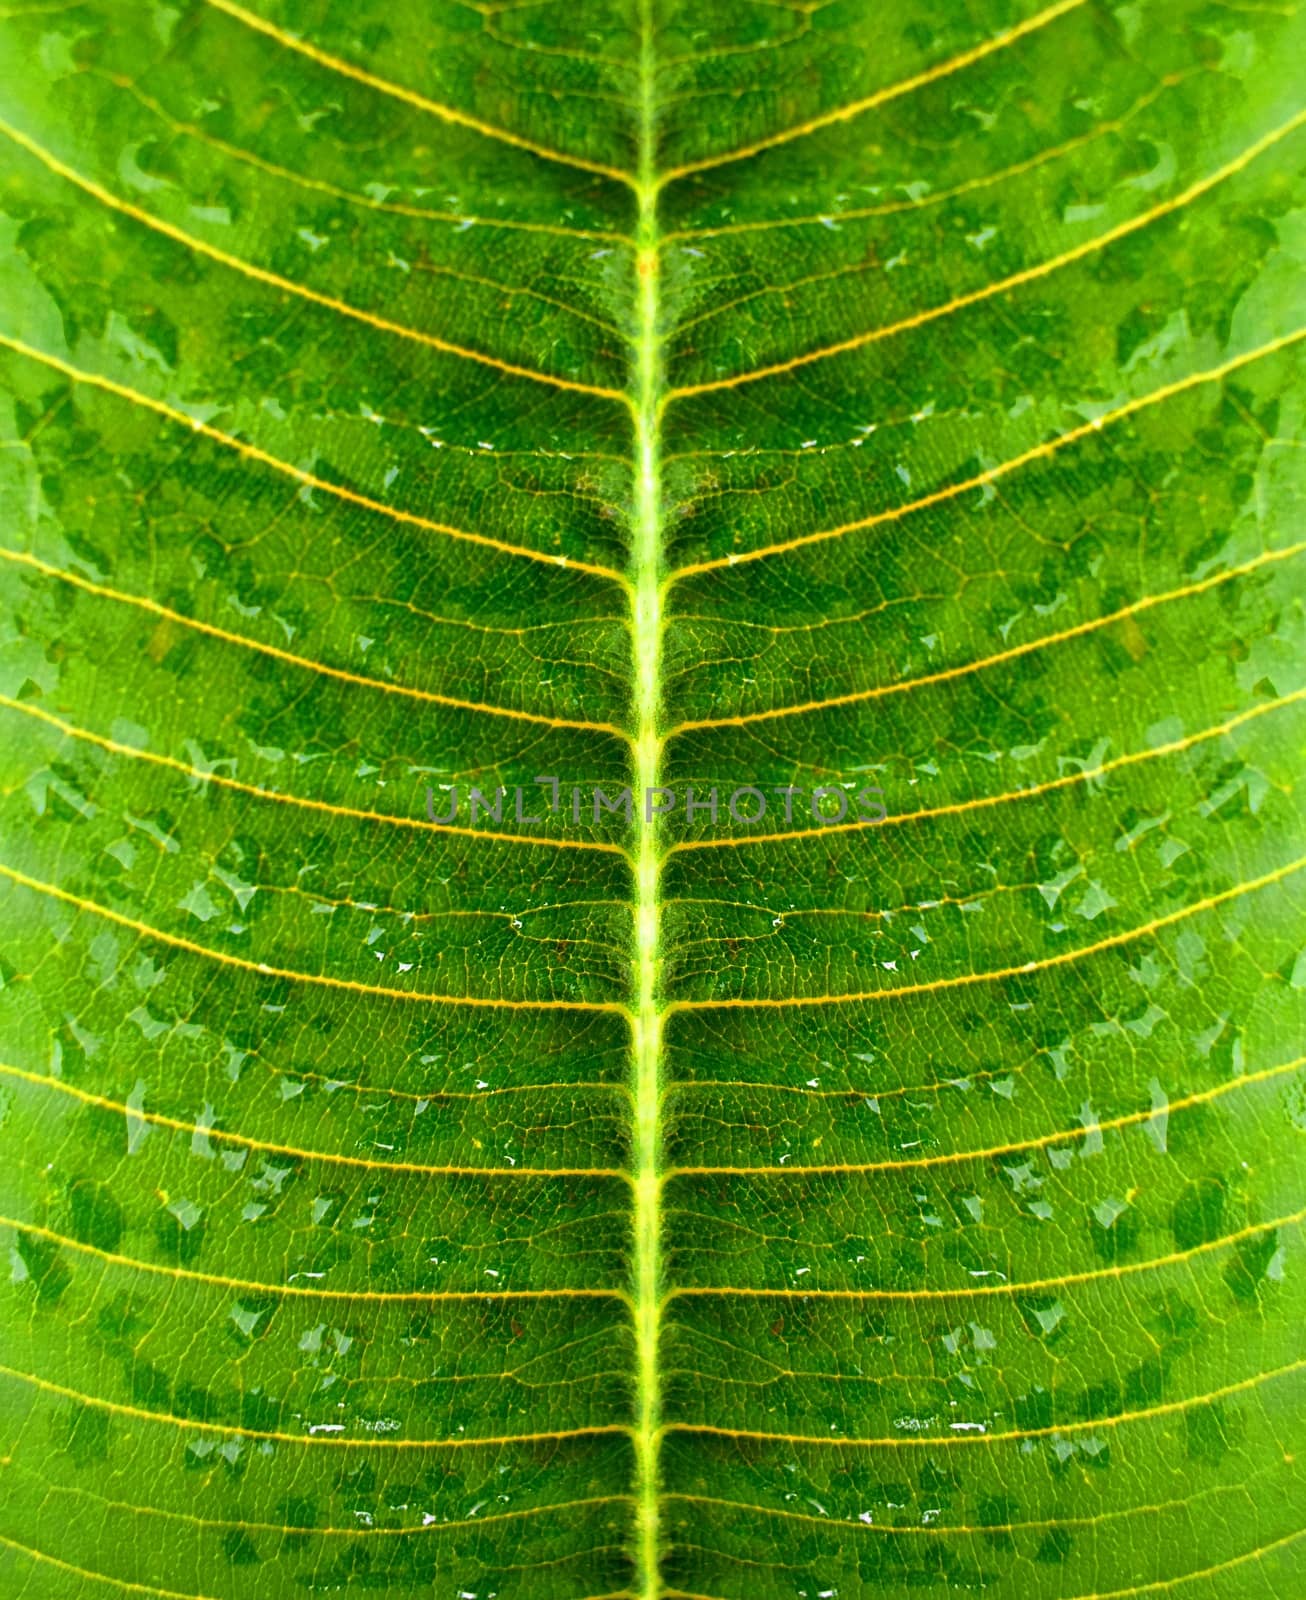 Water droplets on a ripe green leaf